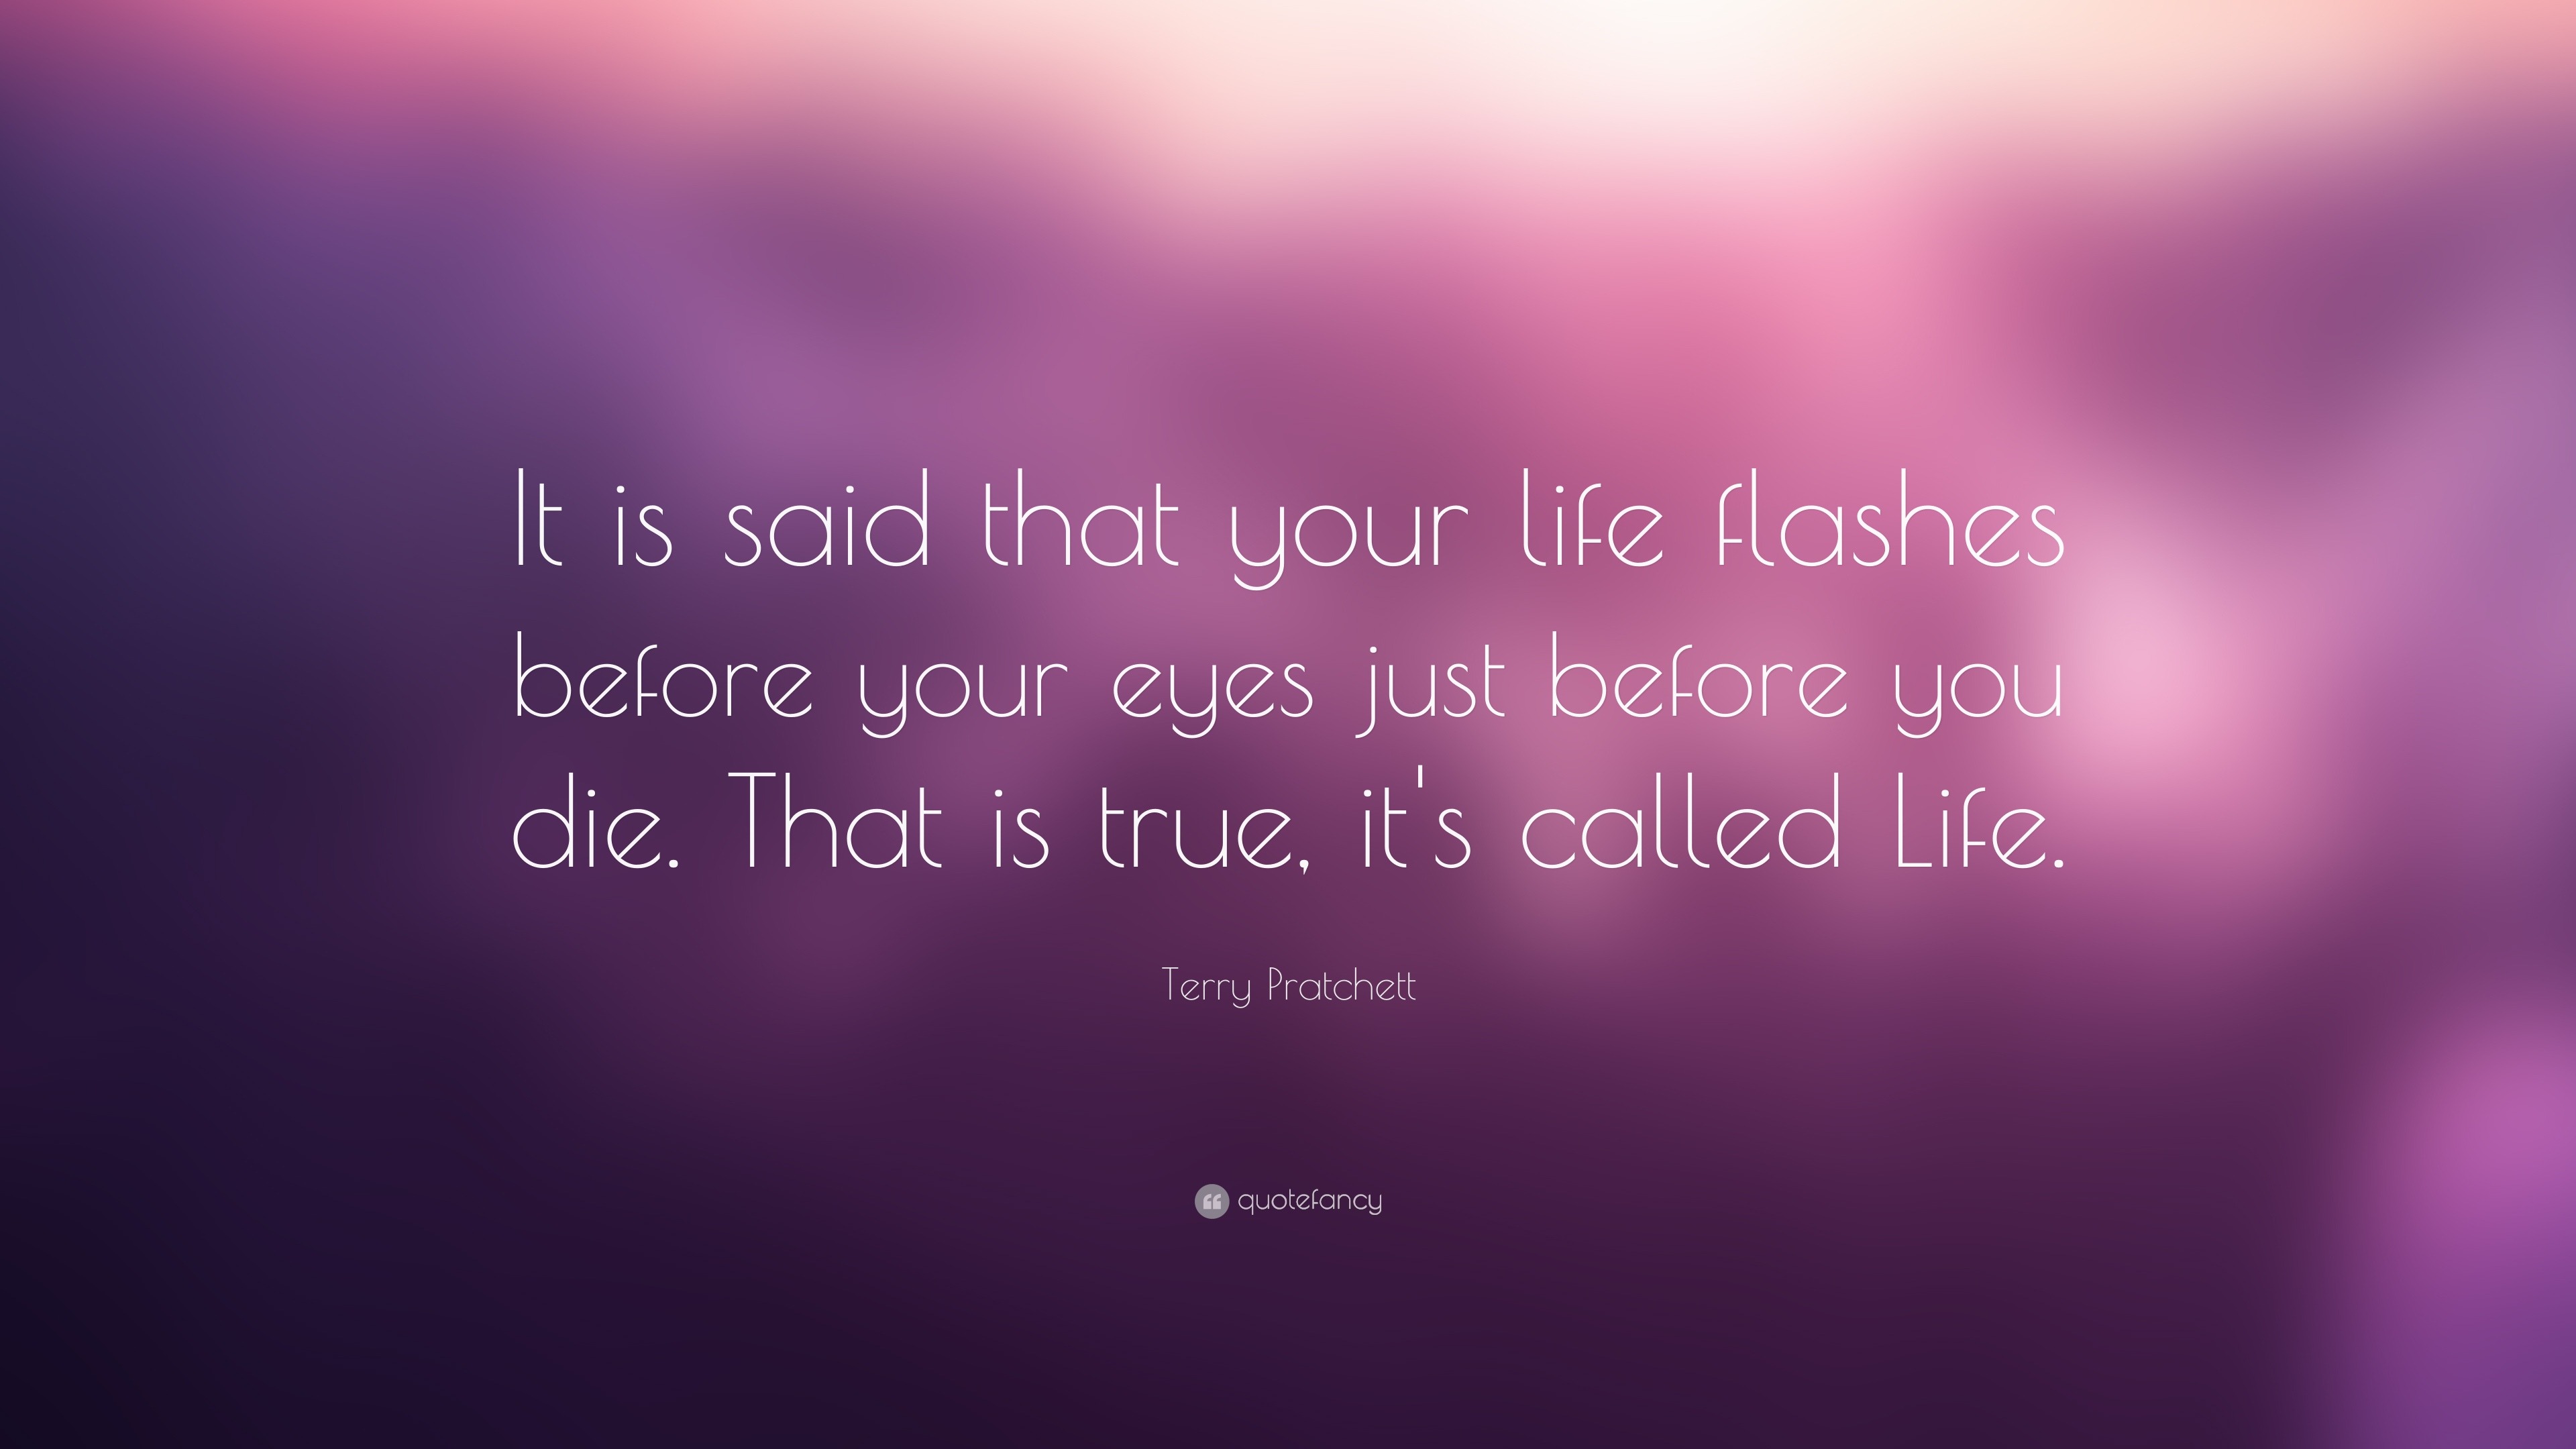 quotes about life life quotes u201cit is said that your flashes before eyes just about